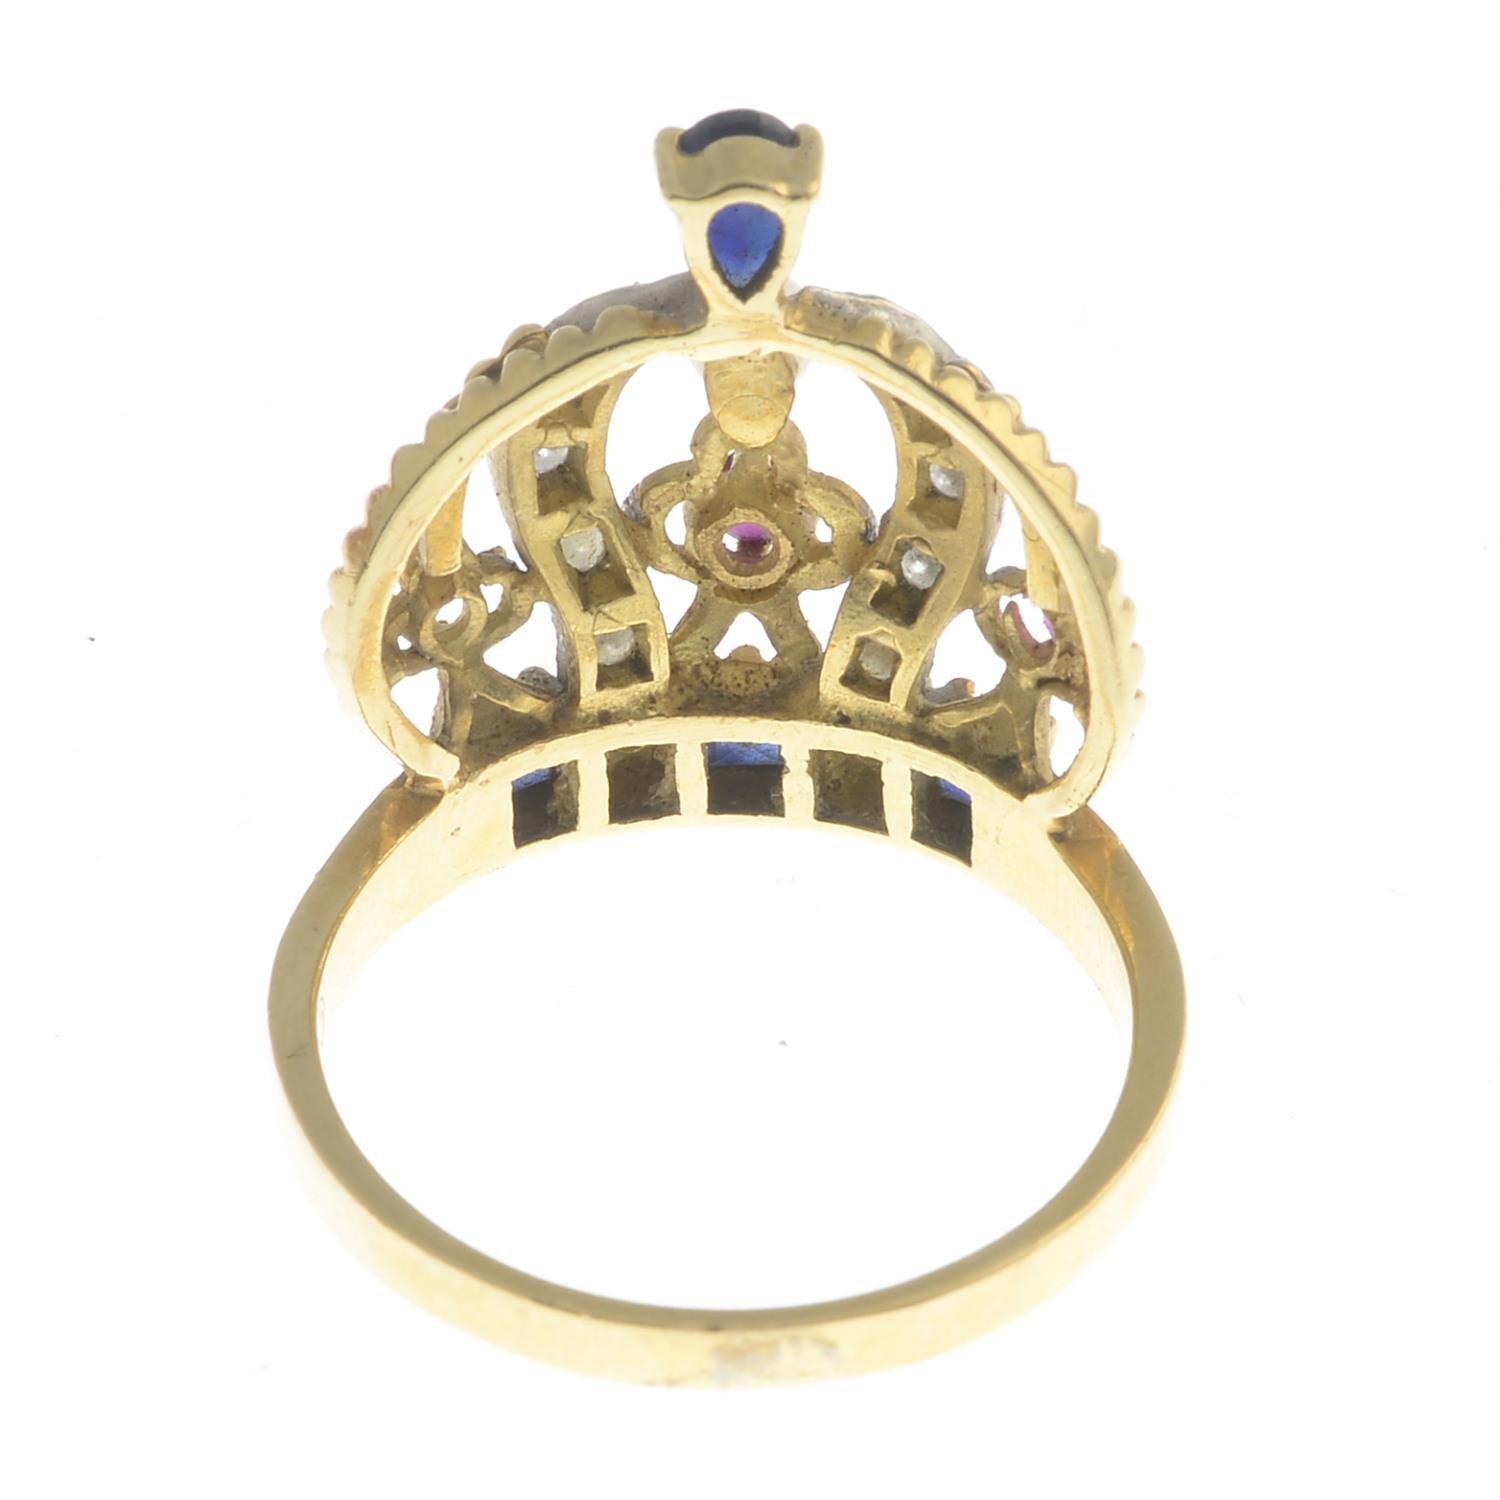 An 18ct gold diamond and gem-set crown ring, - Image 2 of 3